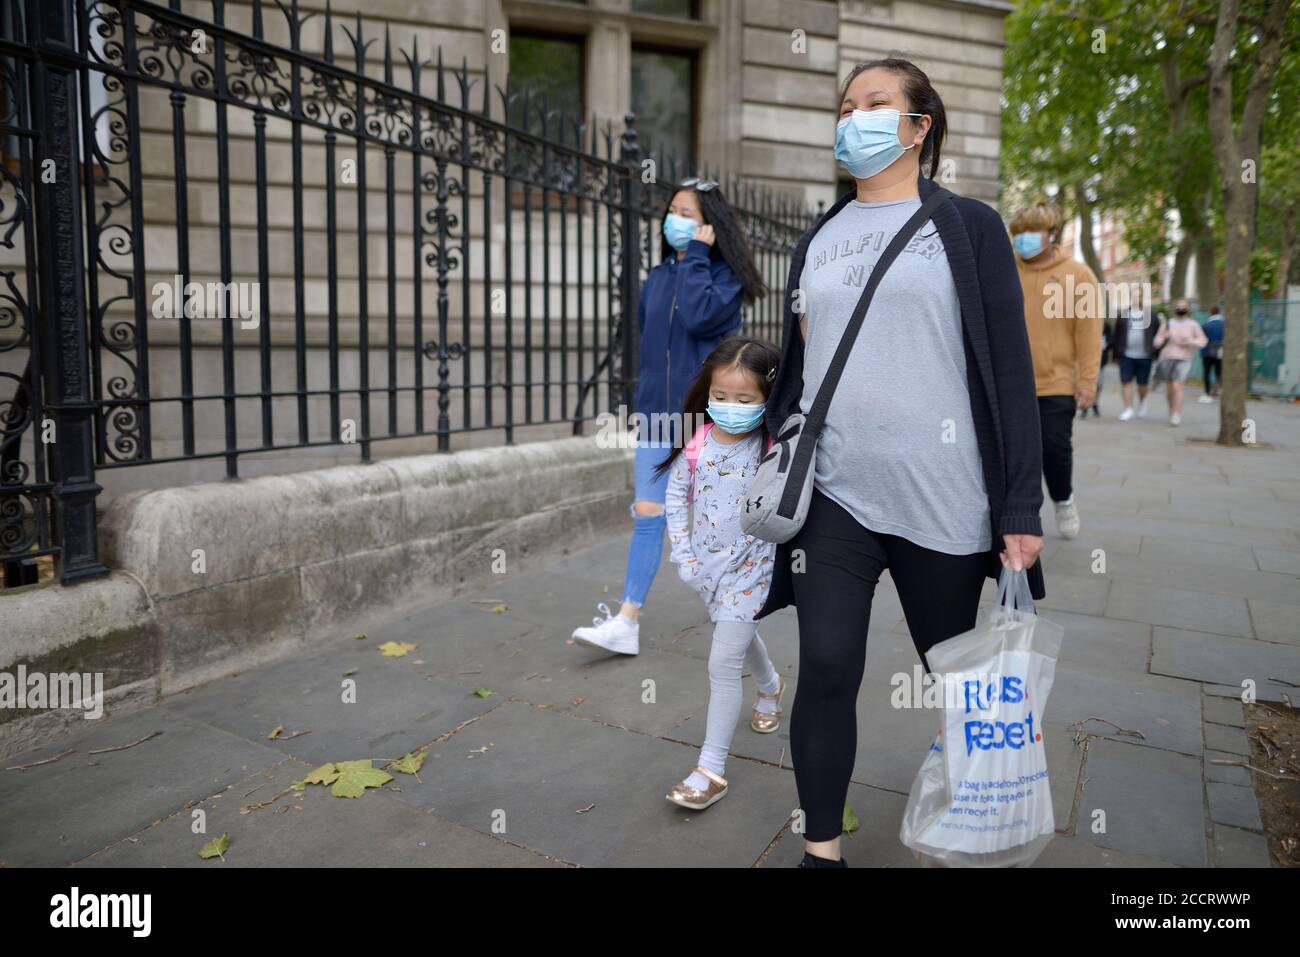 London, England, UK. Asian family wearing facemasks during the COVID pandemic, August 2020 Stock Photo